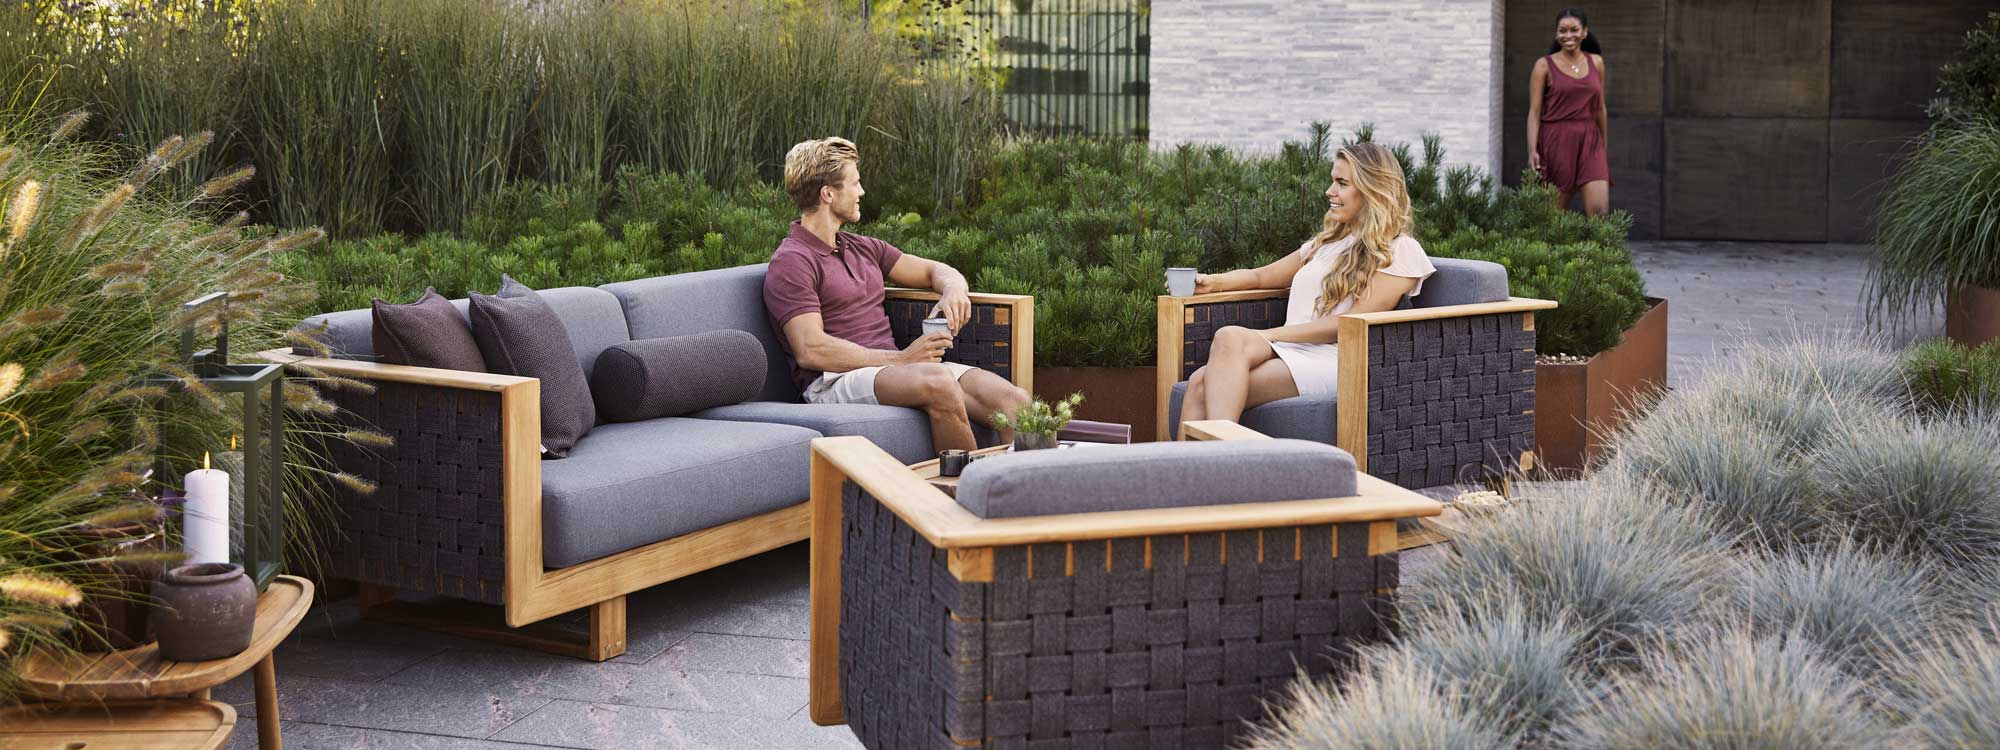 Image of couple relaxing in Caneline Angle teak sofa and lounge chair, surrounded by raised beds of grasses